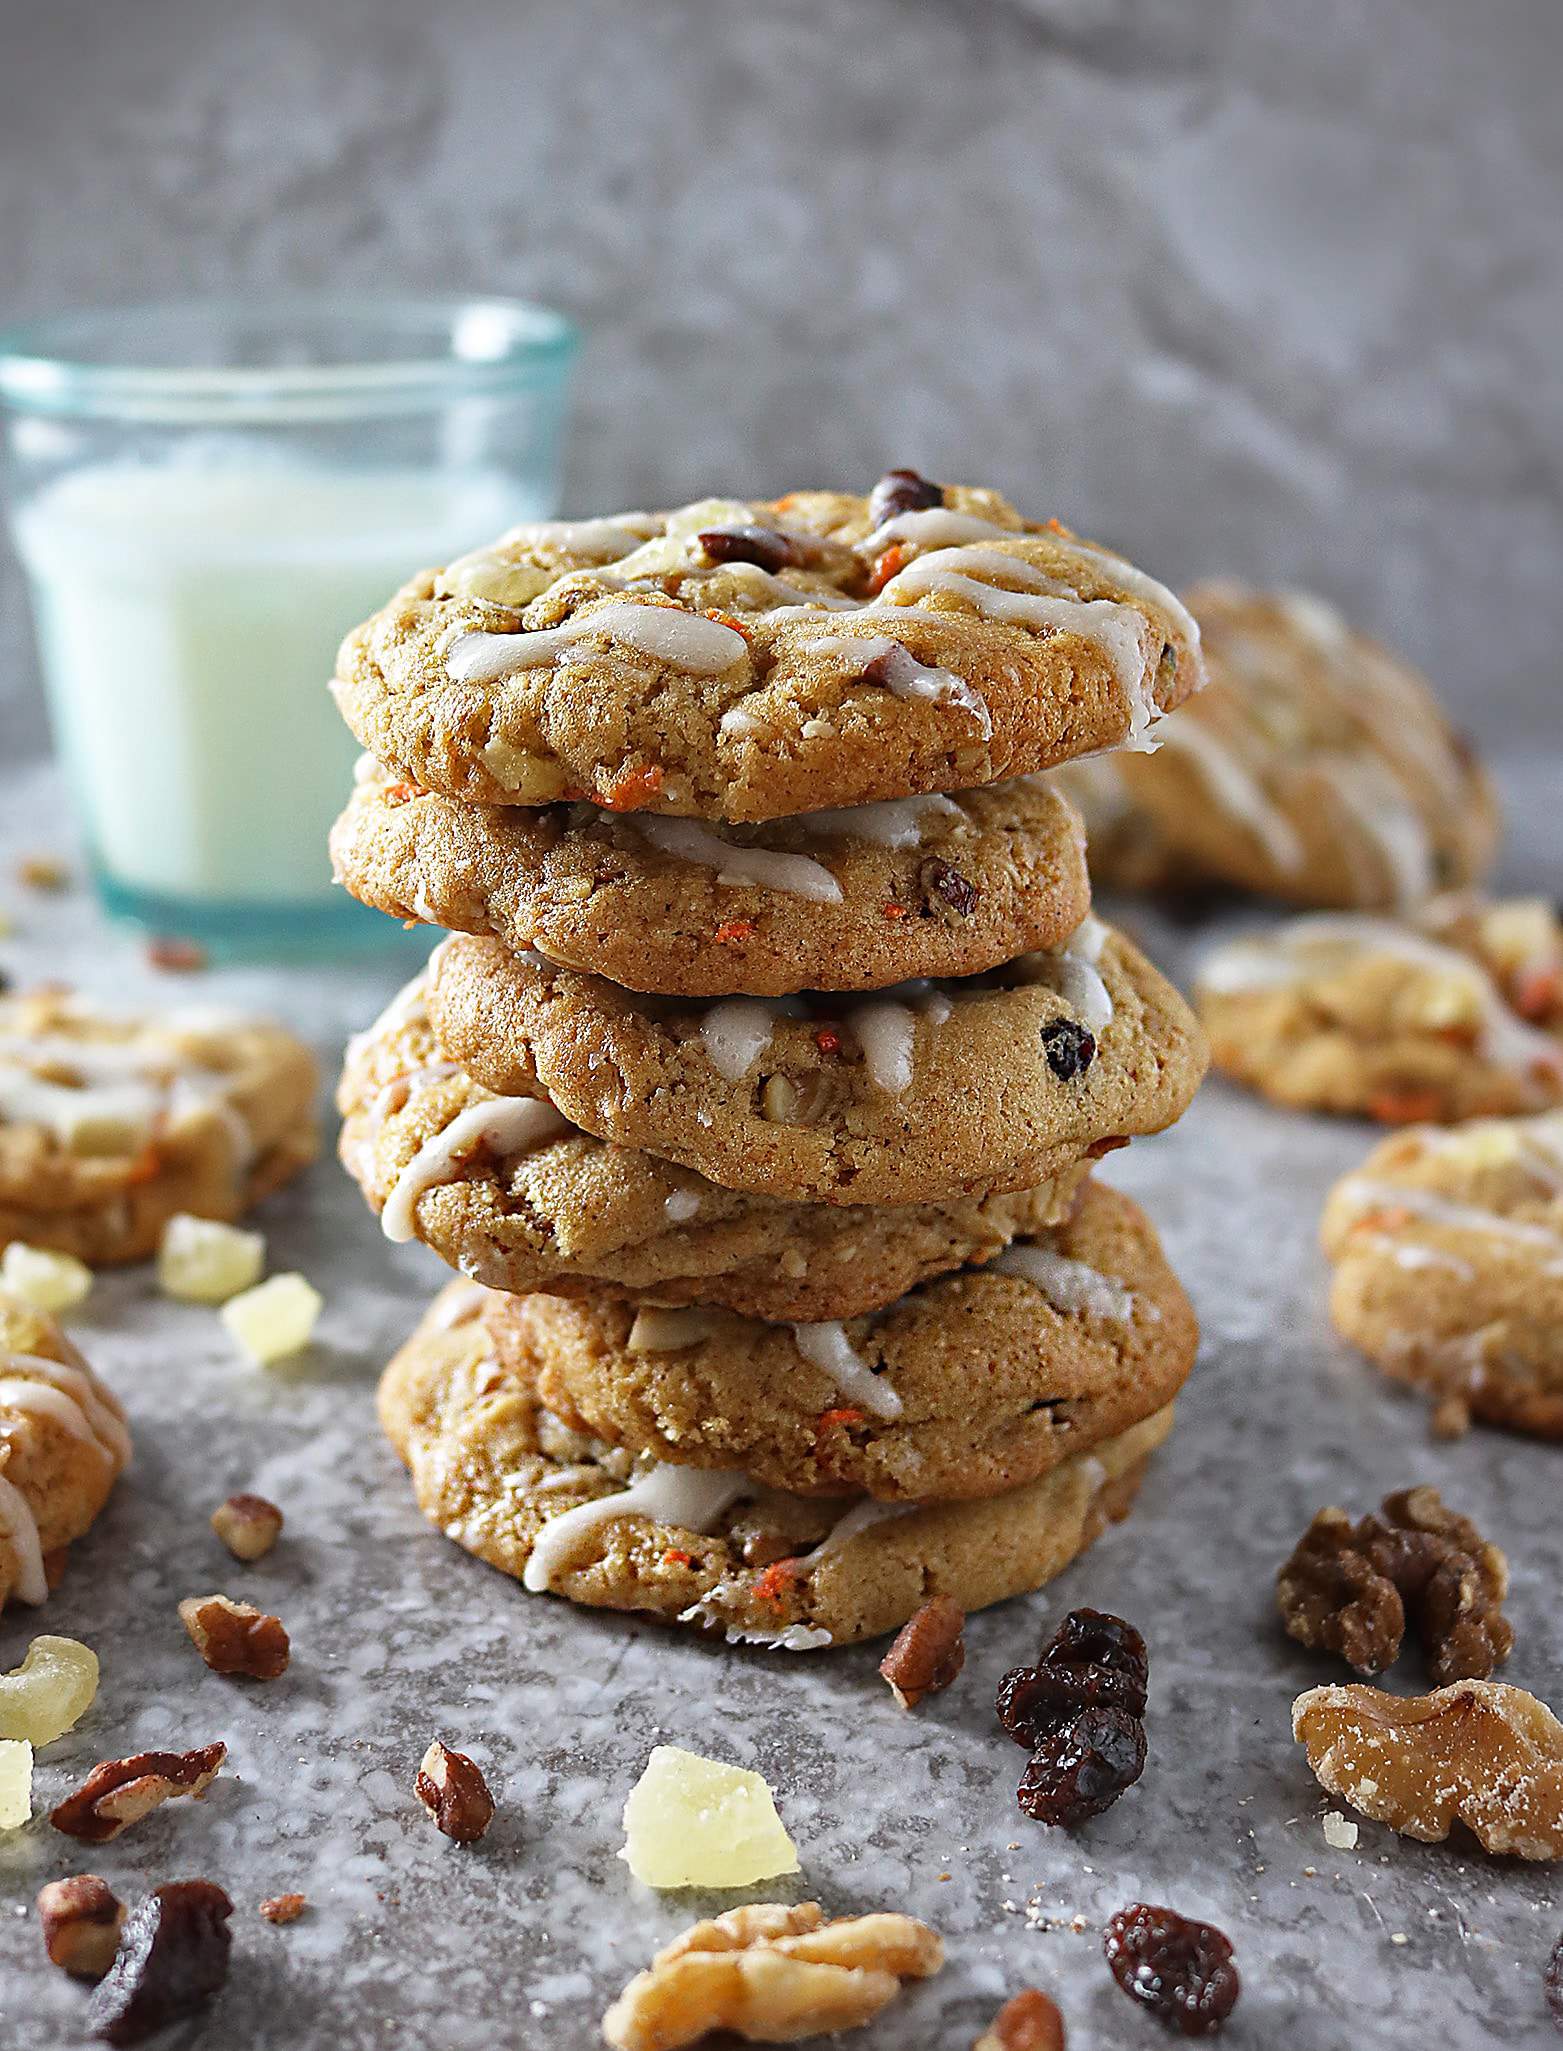 Carrot Cake Cookies with Cream Cheese Drizzle - Savory Spin